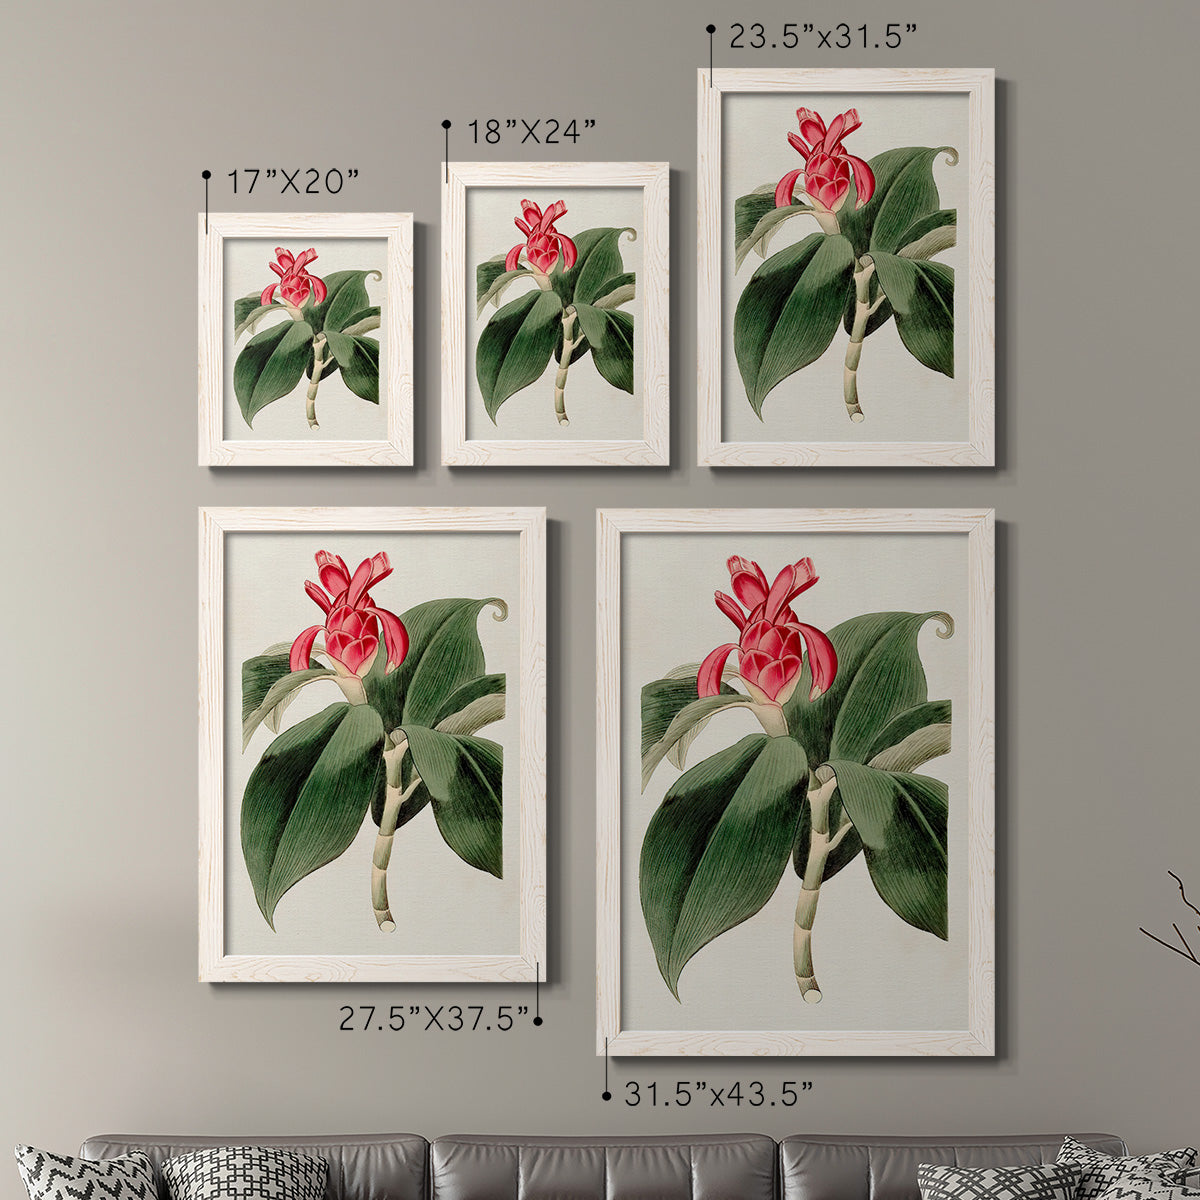 Flora of the Tropics I - Premium Framed Canvas 2 Piece Set - Ready to Hang